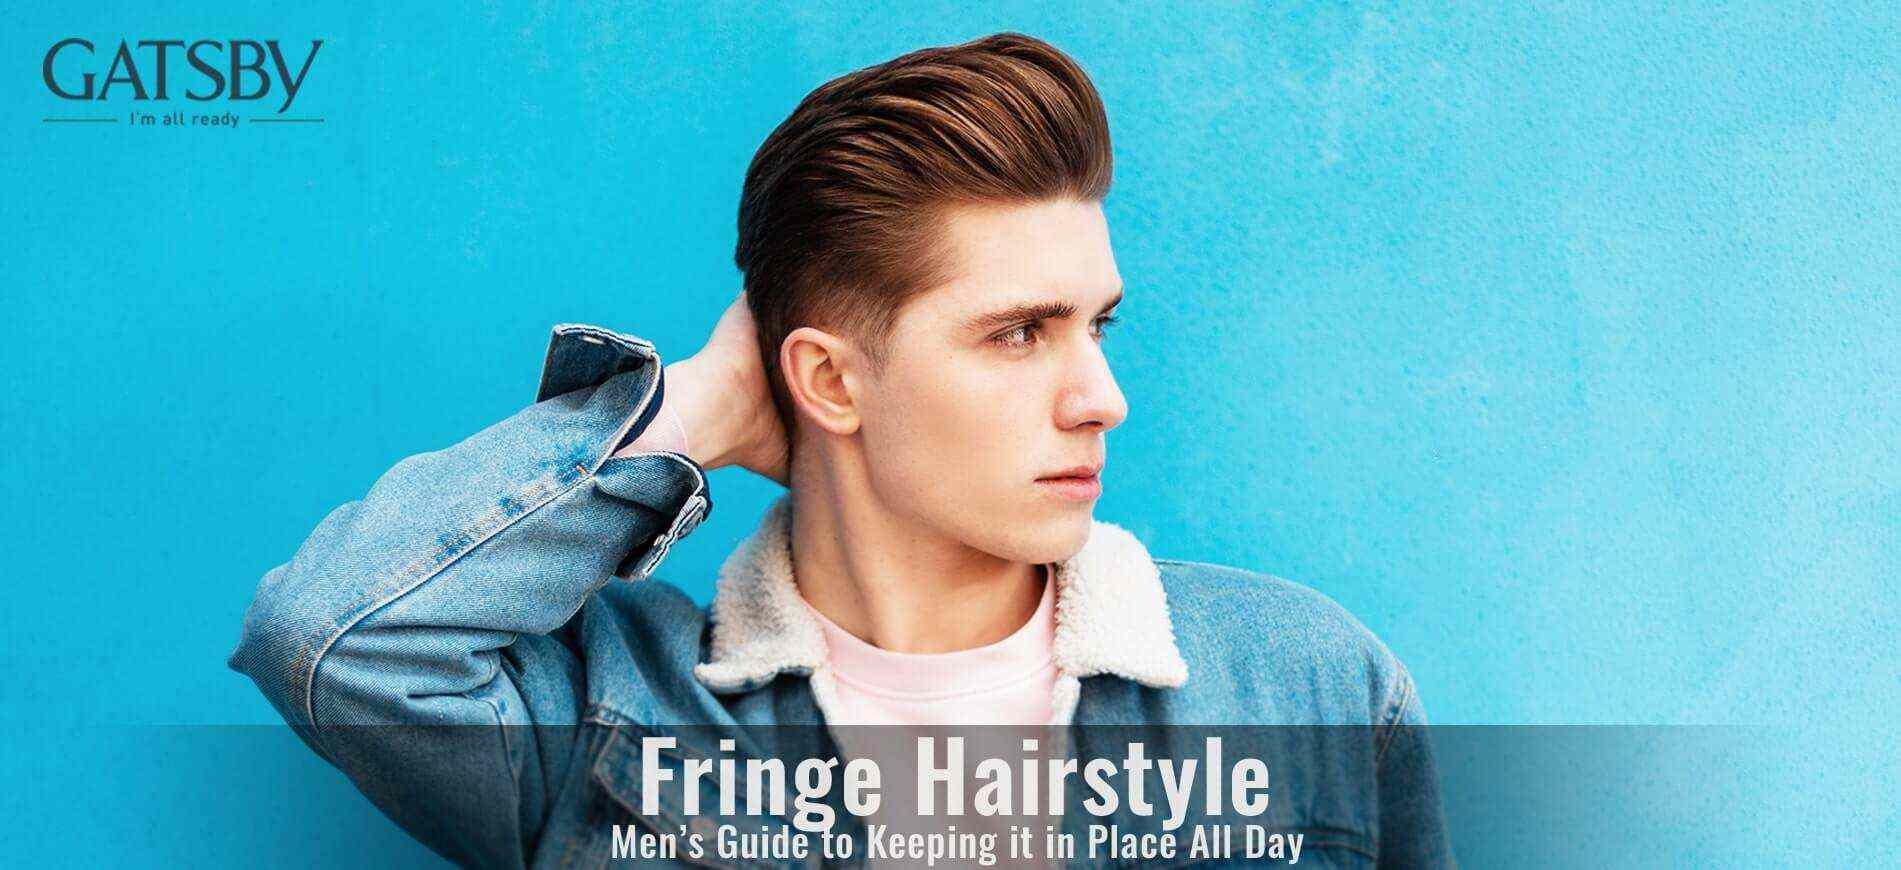 Men’s Guide to Keeping Your Fringe Hairstyle in Place